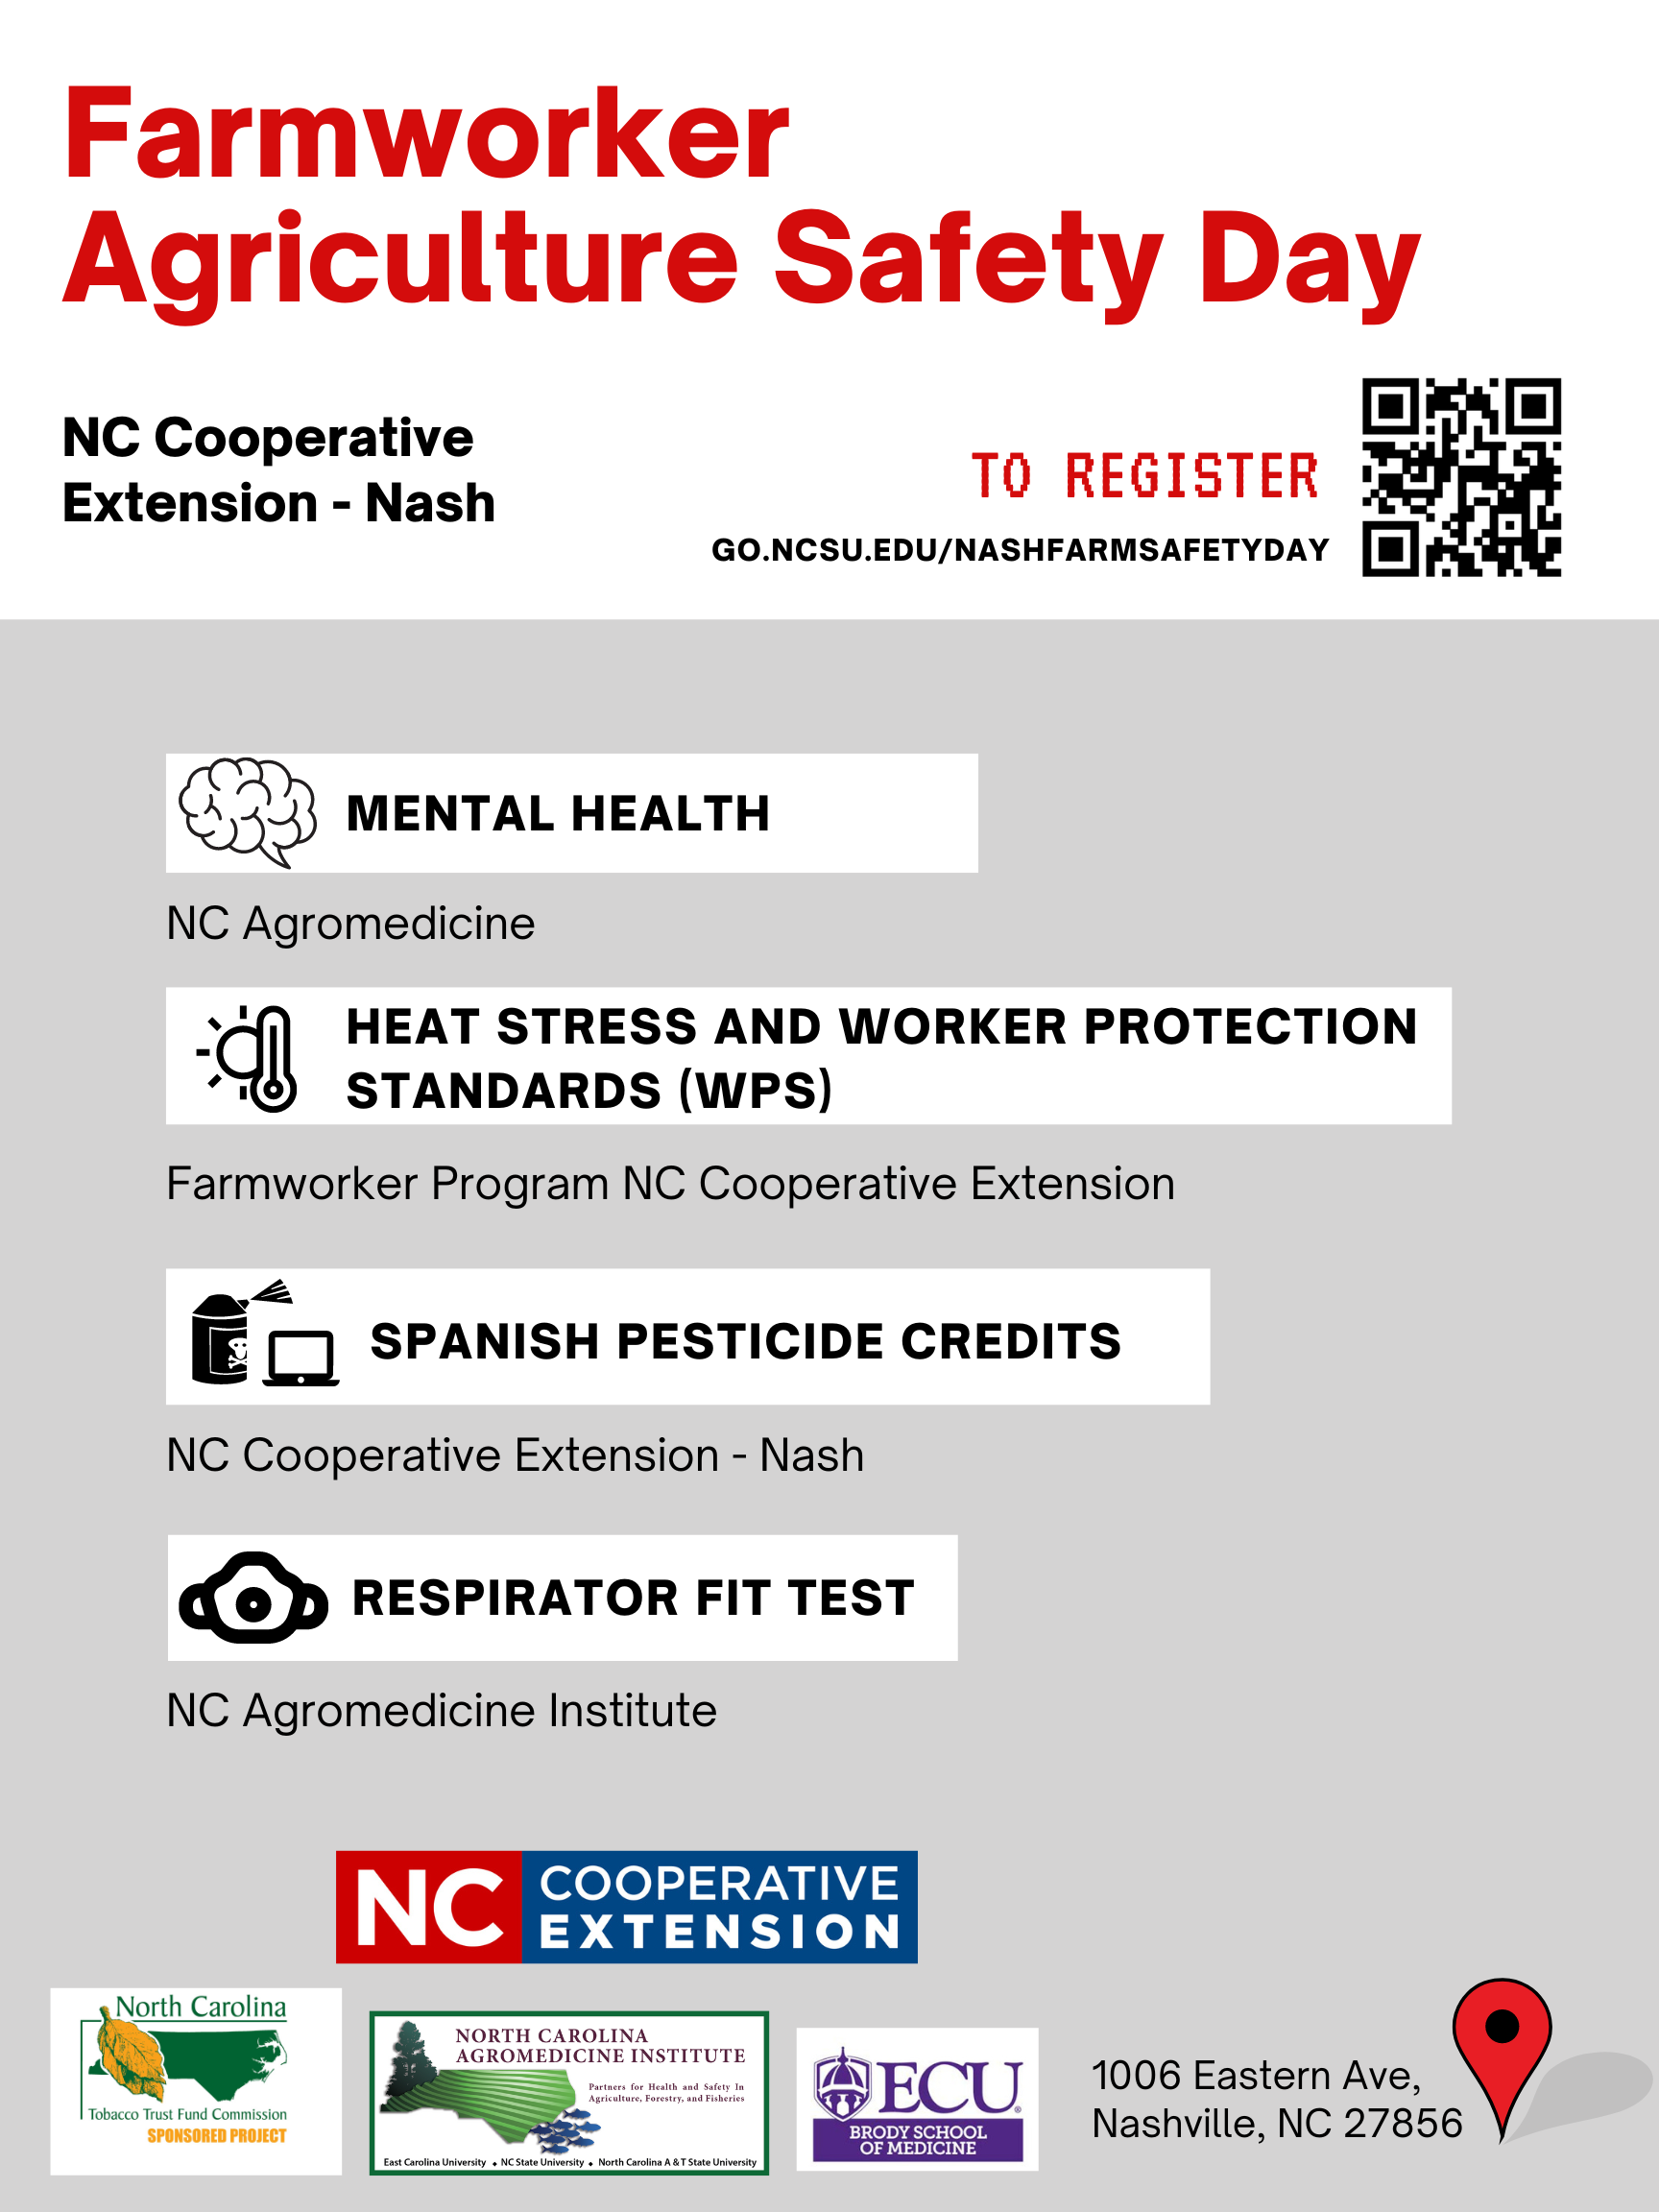 Farmworker Agriculture Safety Day